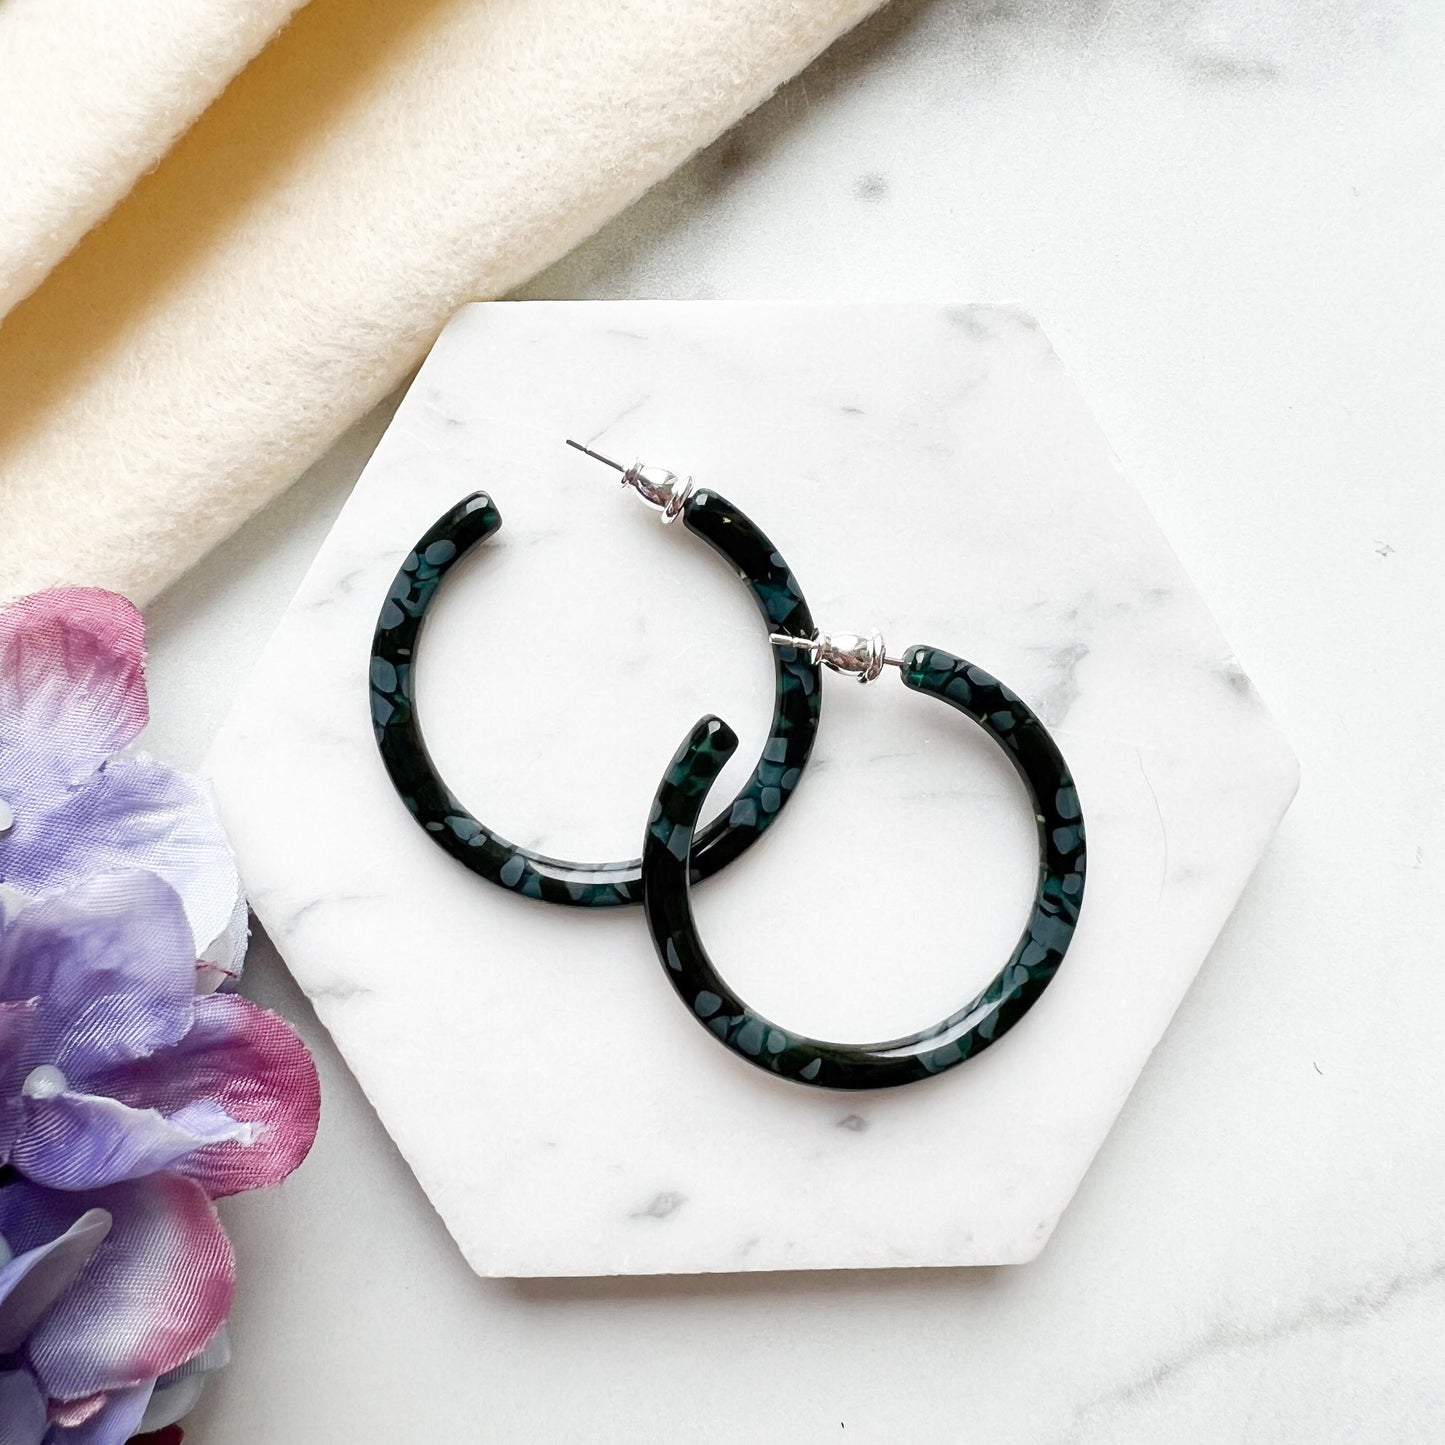 40mm Thin Round Hoops in the Hydrangea Collection| Large Hoop Earrings Flower Floral Hoops Cellulose Acetate 925 Sterling Silver Posts